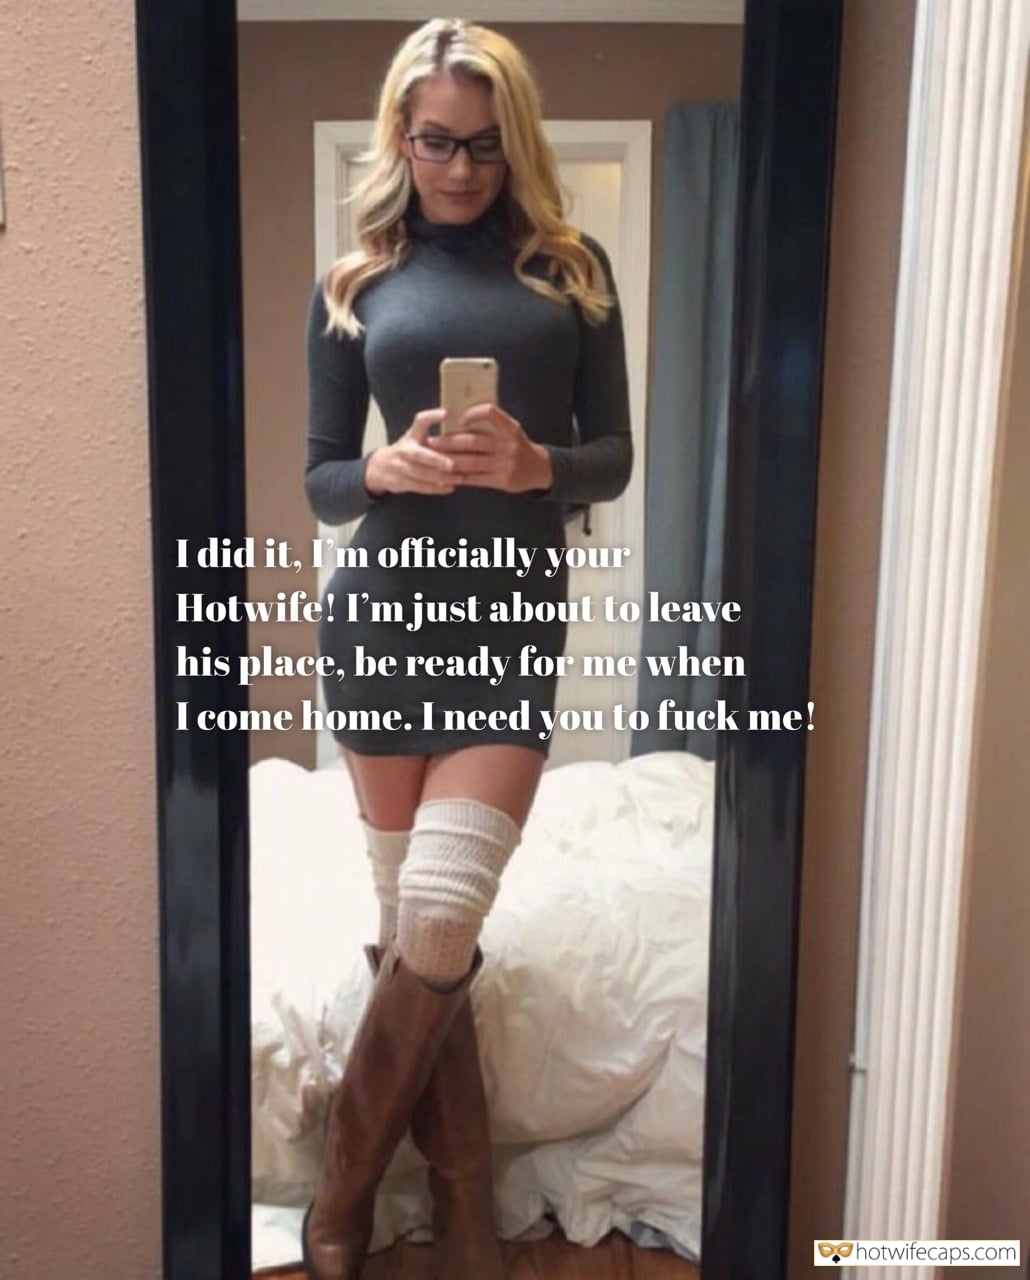 My Favorite Hotwife Caption №559199 Come with the cum in pussy image picture